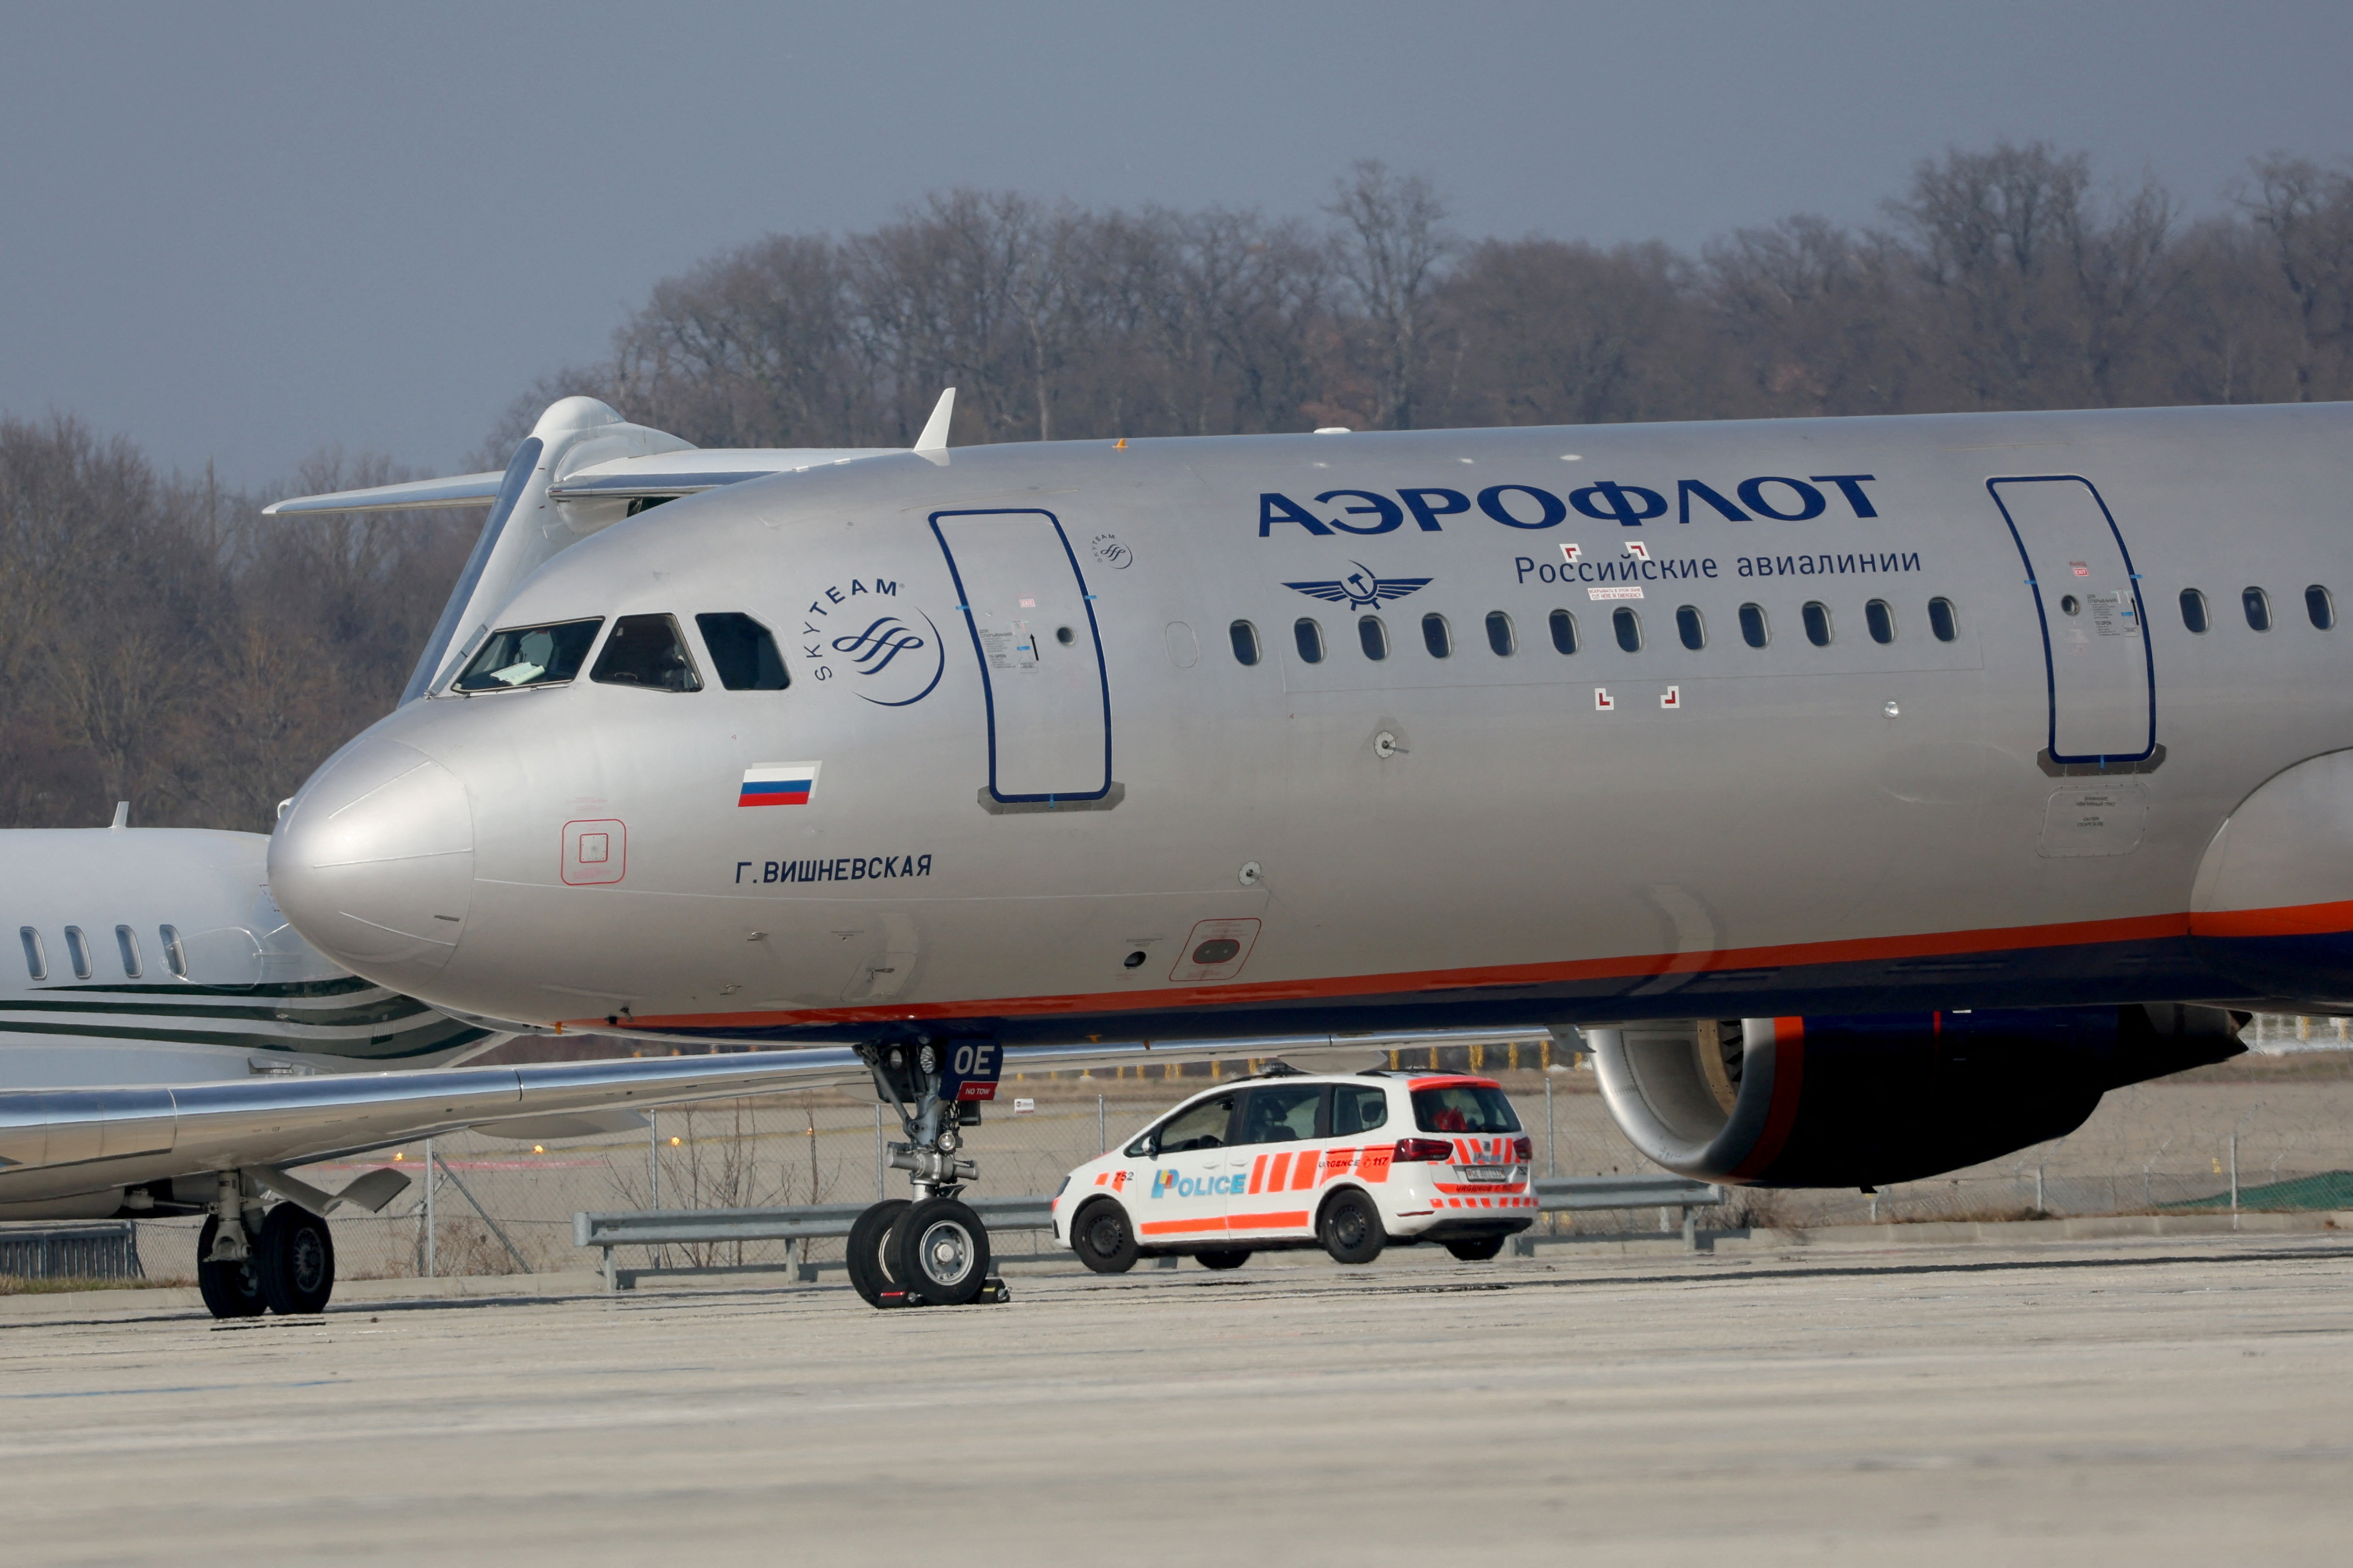 Aircraft of Russian airline Aeroflot is pictured at Cointrin airport in Geneva